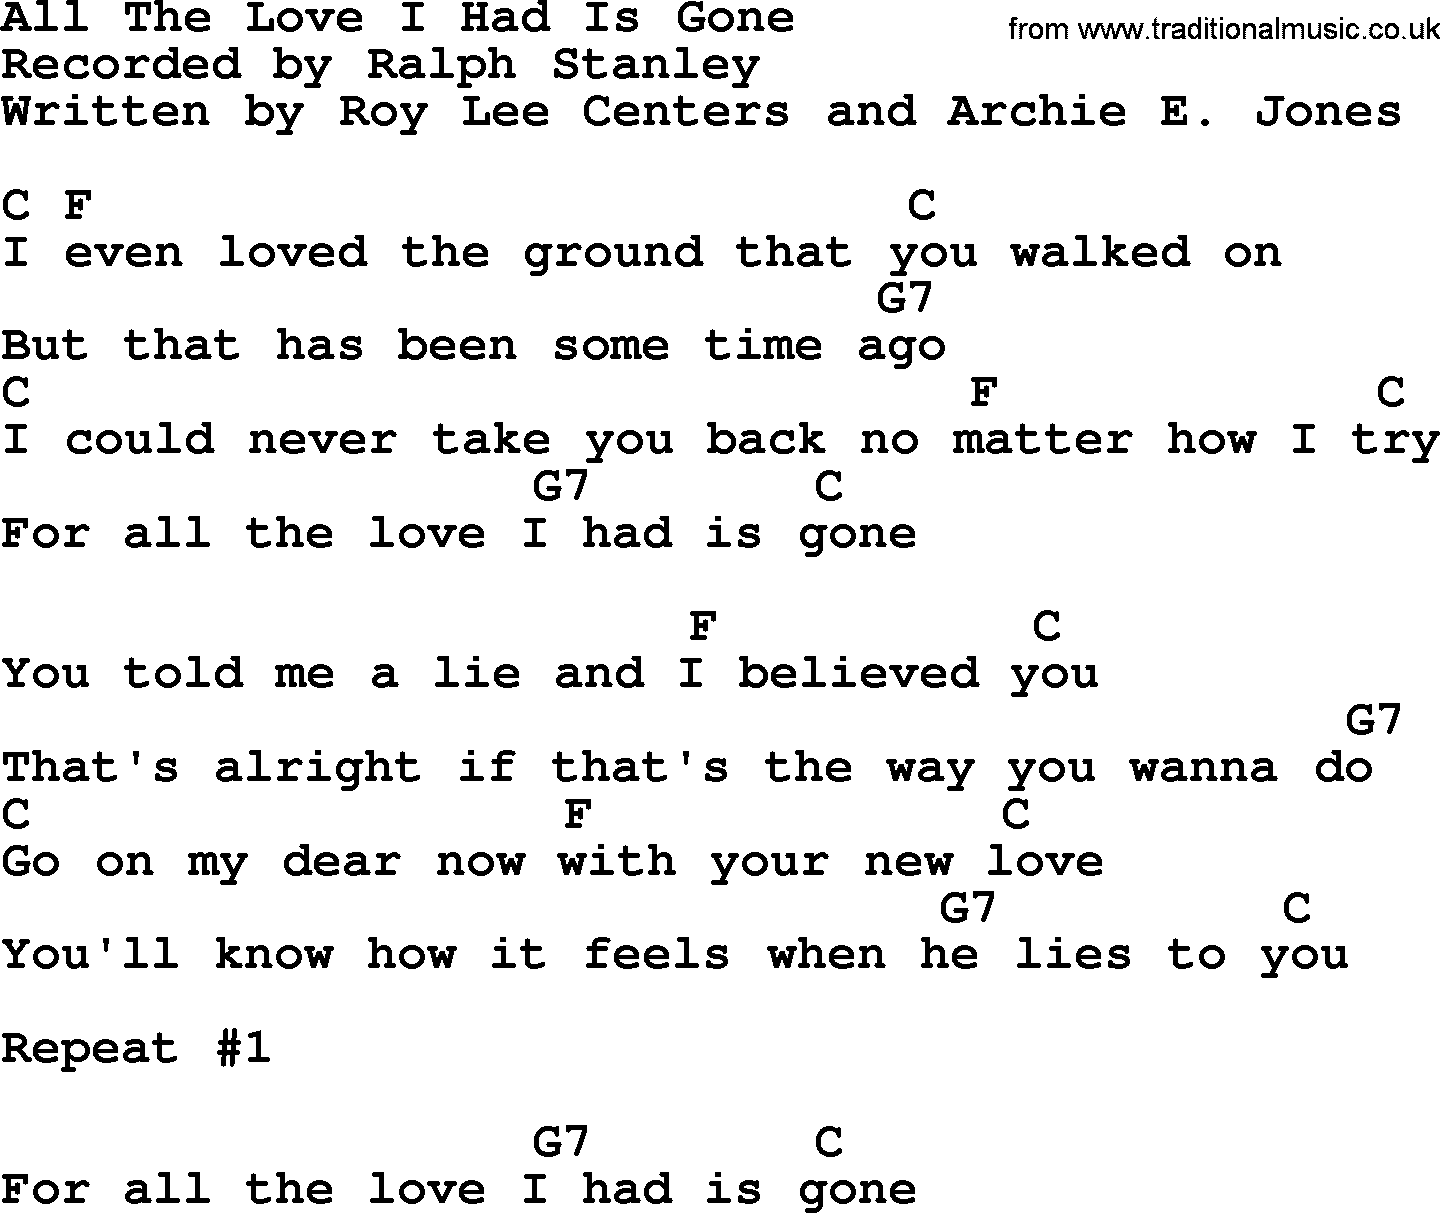 Bluegrass song: All The Love I Had Is Gone, lyrics and chords